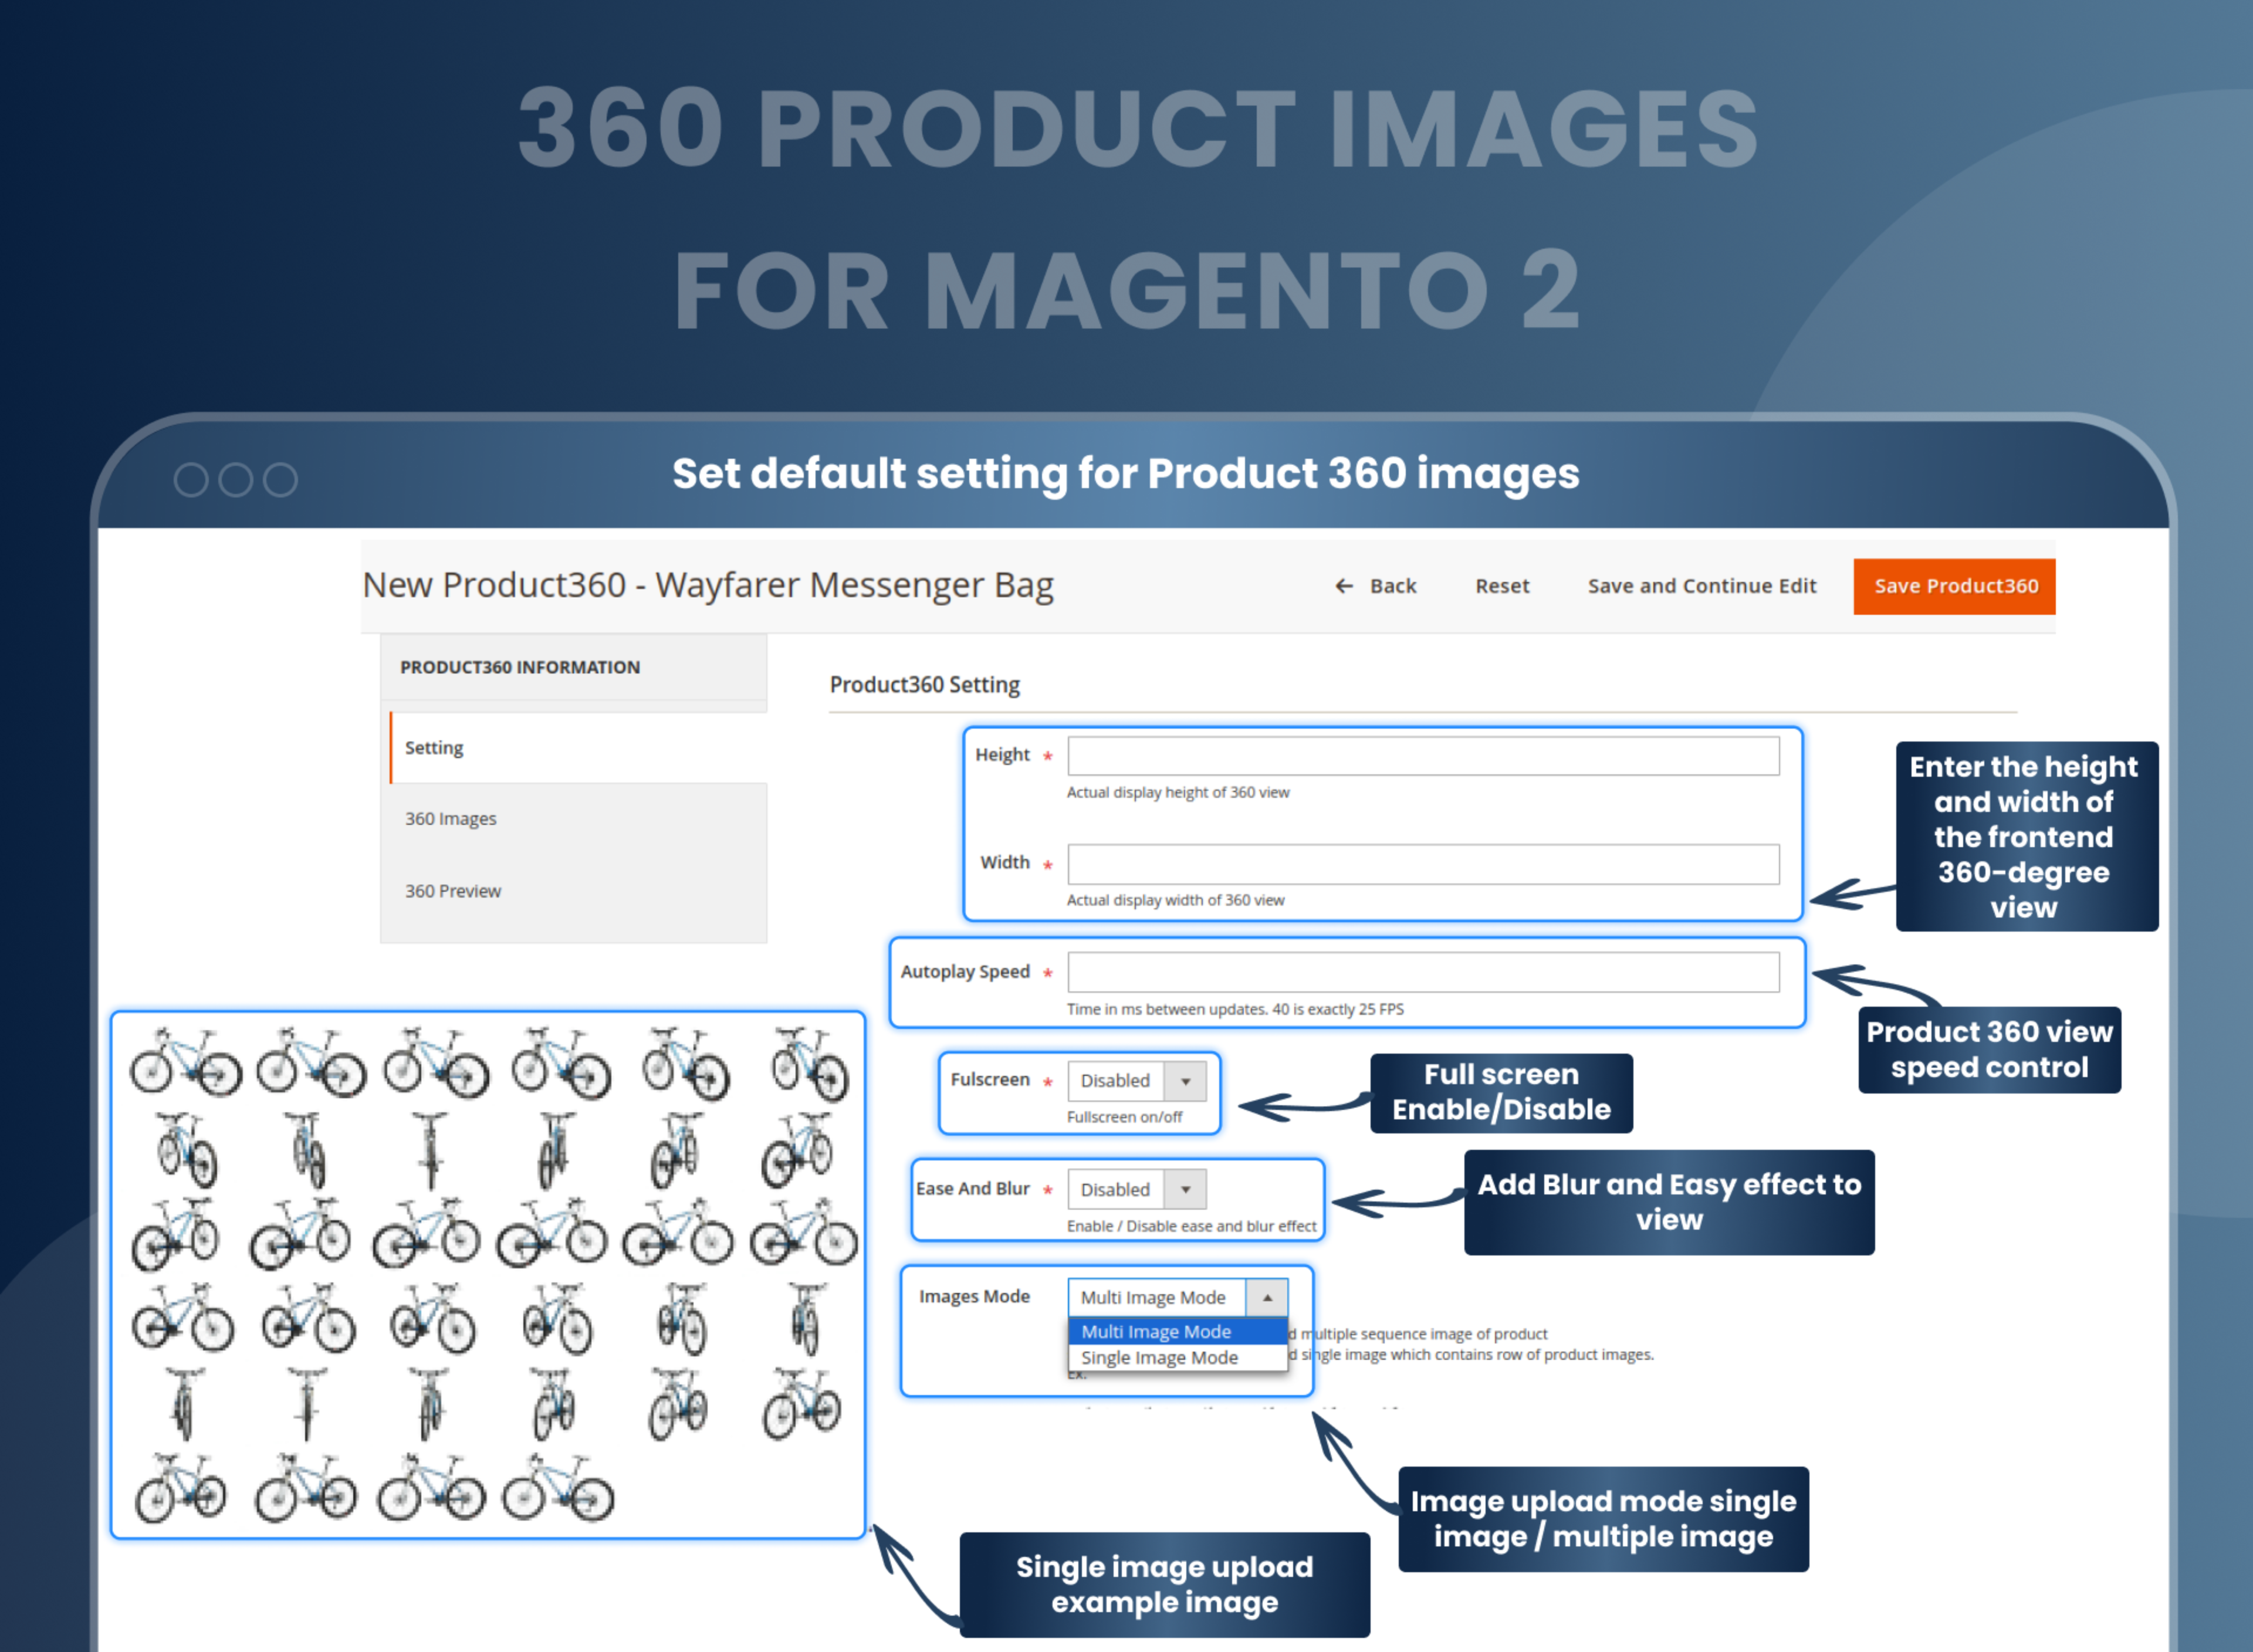 Set default setting for Product 360 images